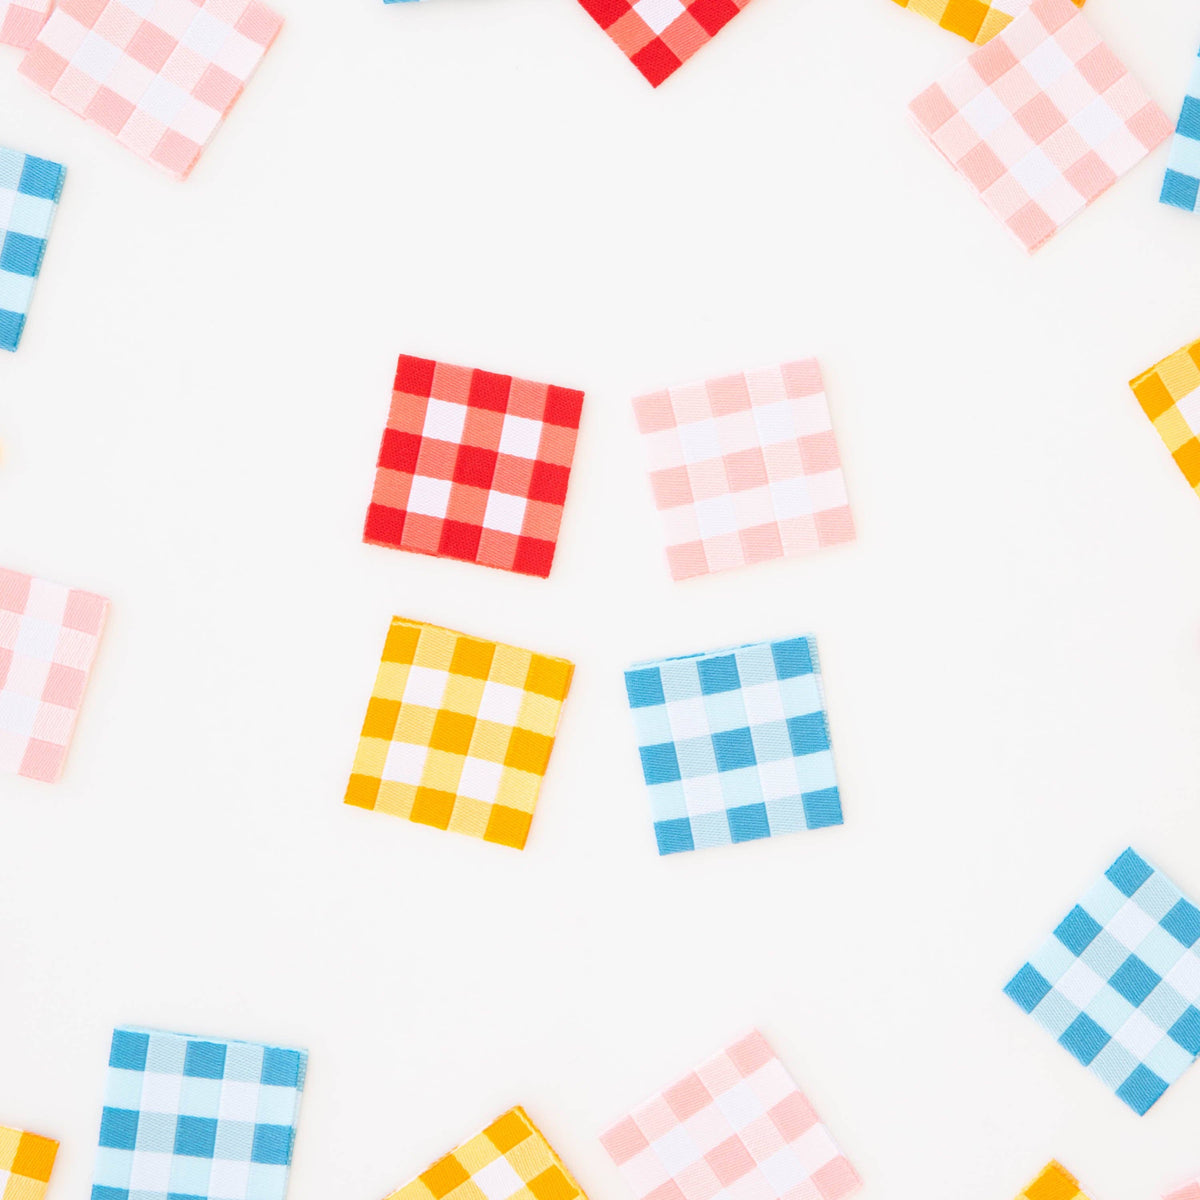 Gingham Woven Sewing Labels | Sarah Hearts